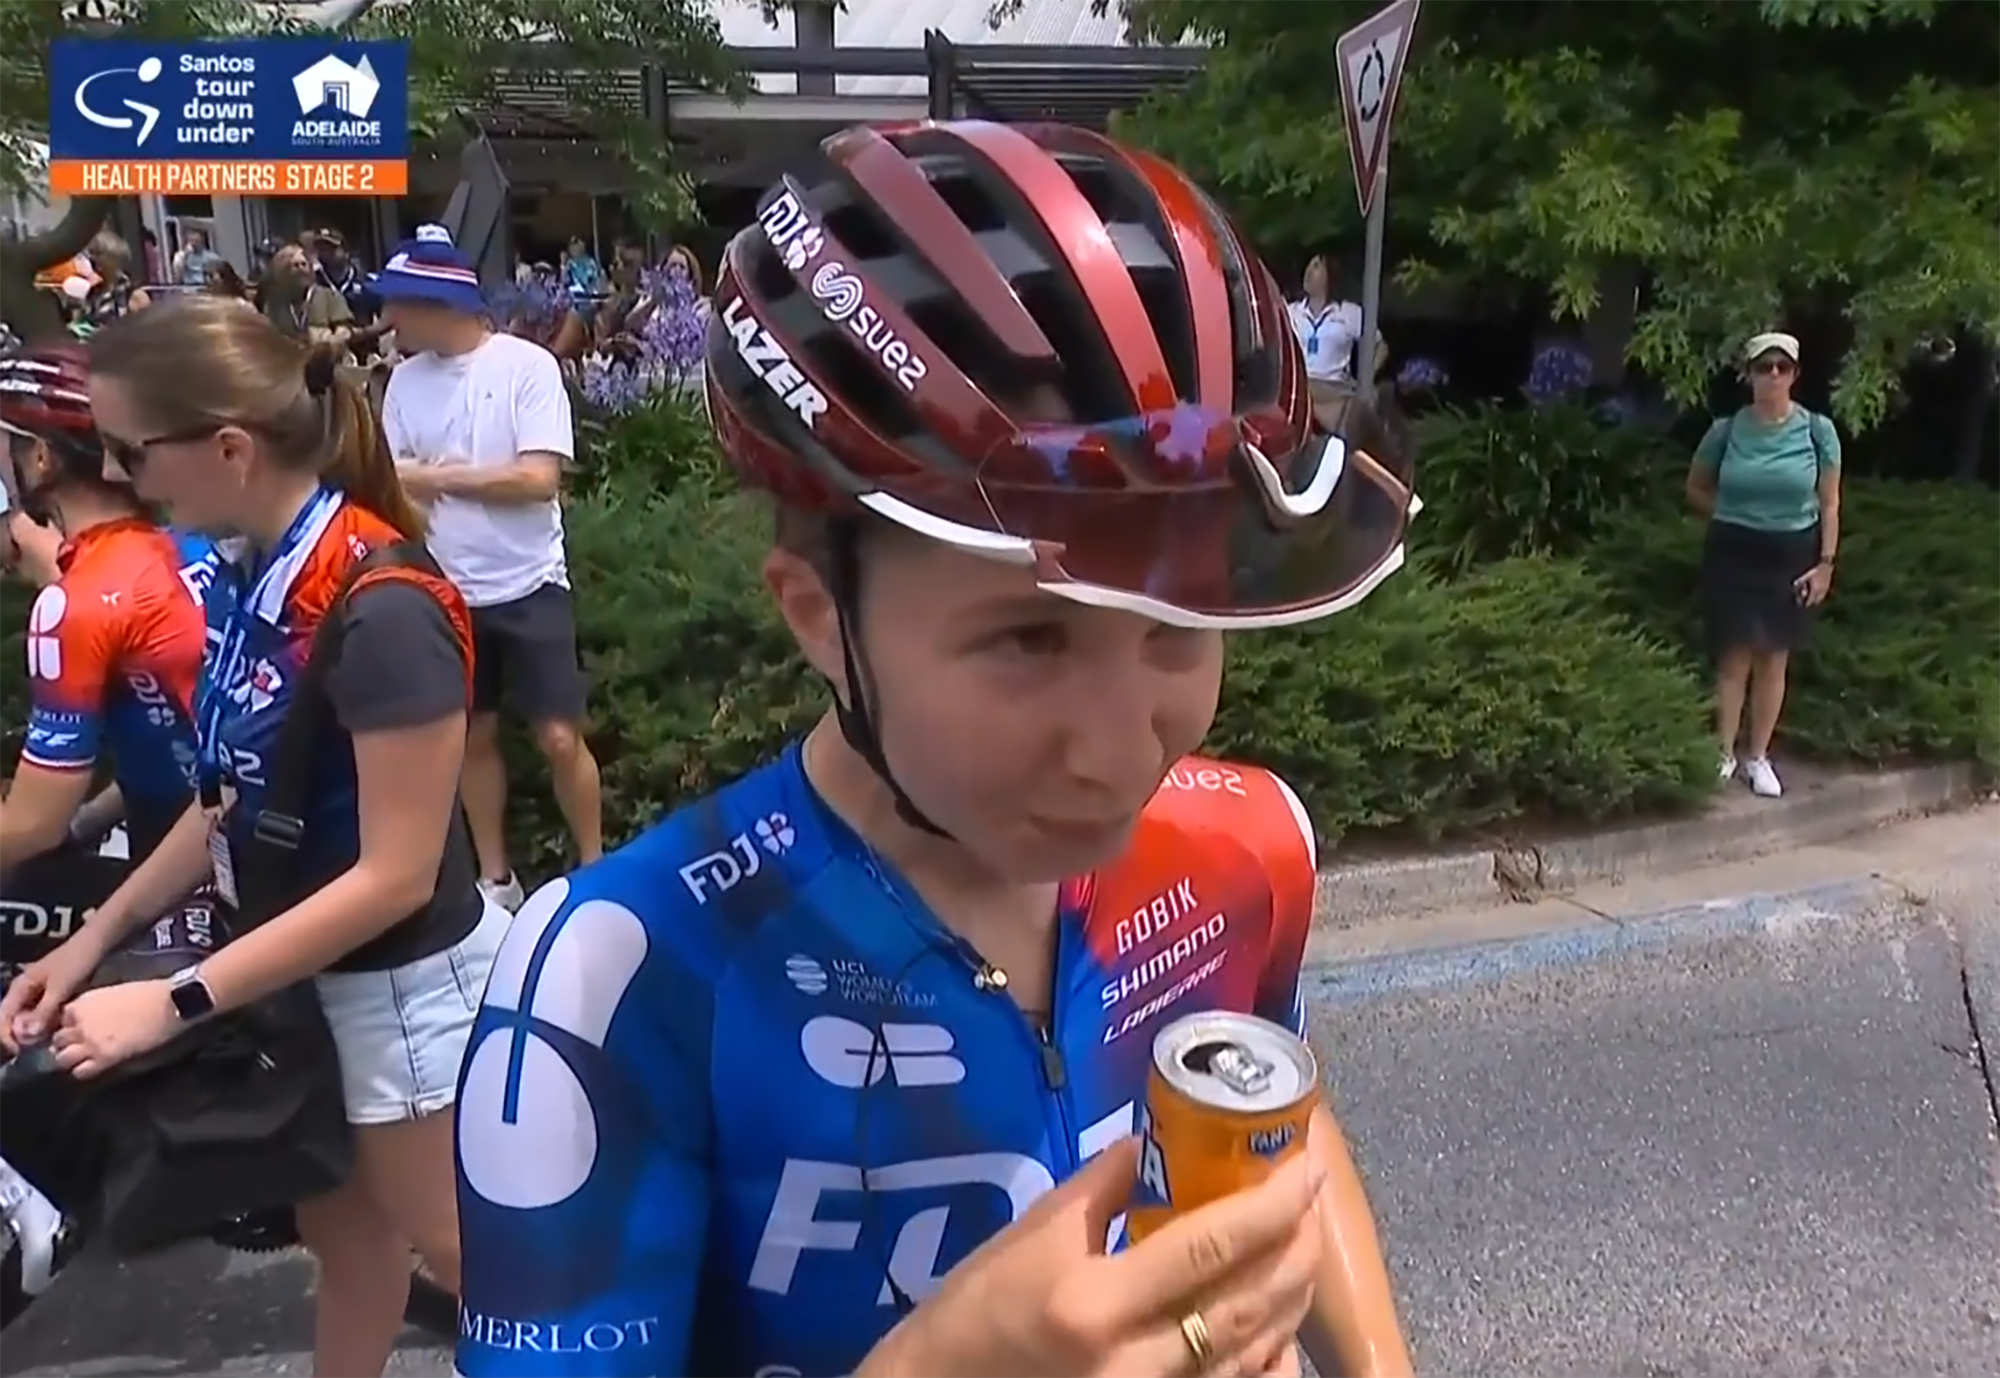 A screengrab of Cecilie Uttrup Ludwig taking a sip of Fanta after winning stage 2 of the women's Tour Down Under.